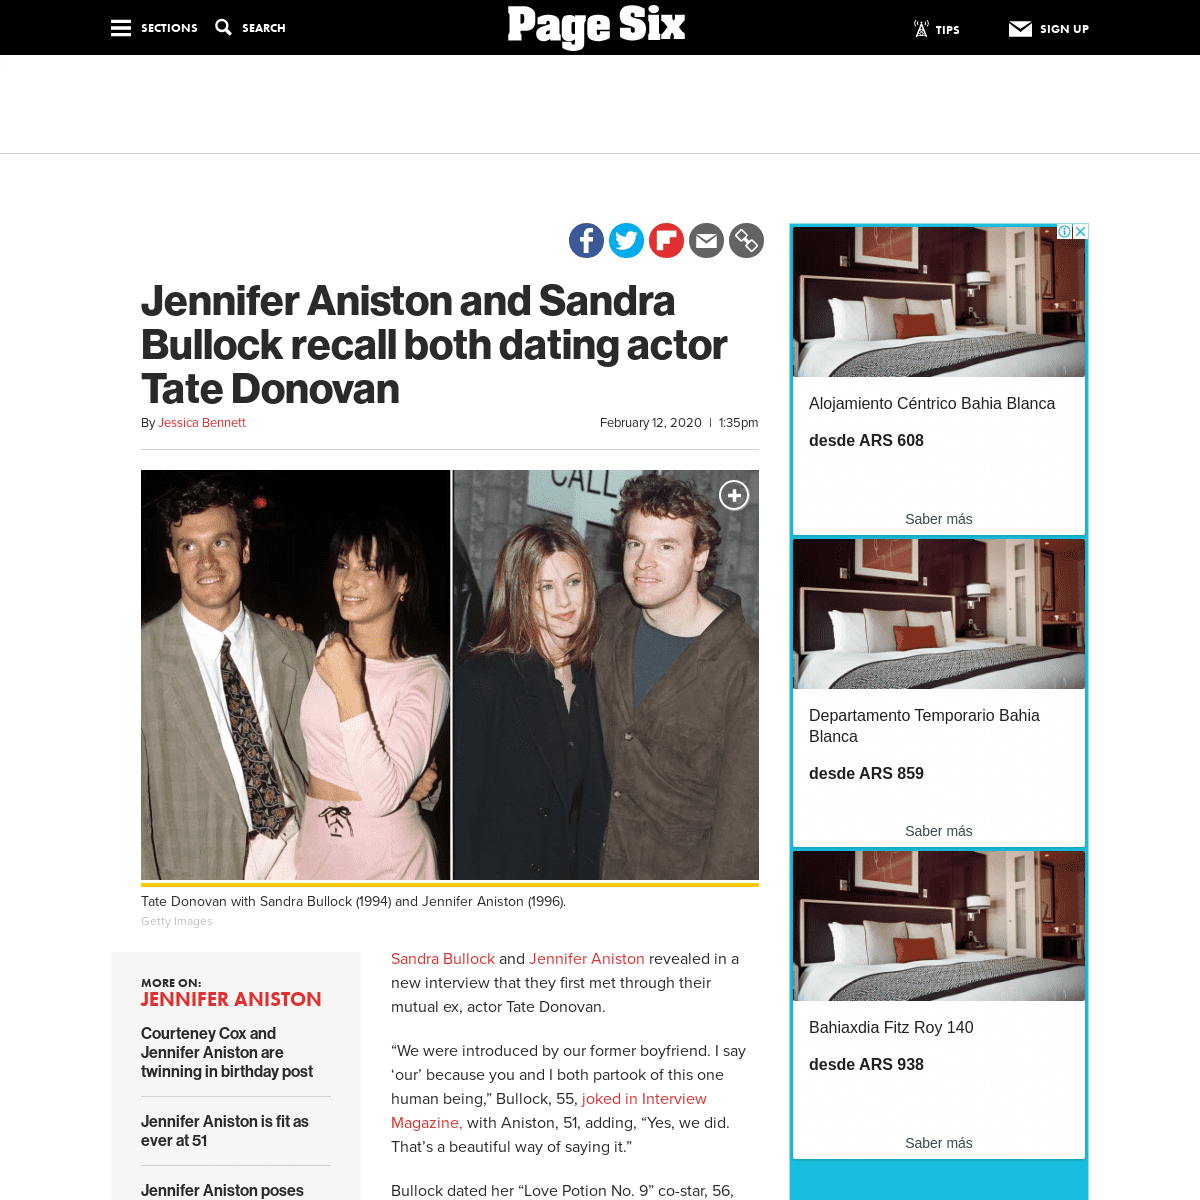 A complete backup of pagesix.com/2020/02/12/jennifer-aniston-and-sandra-bullock-recall-both-dating-actor-tate-donovan/